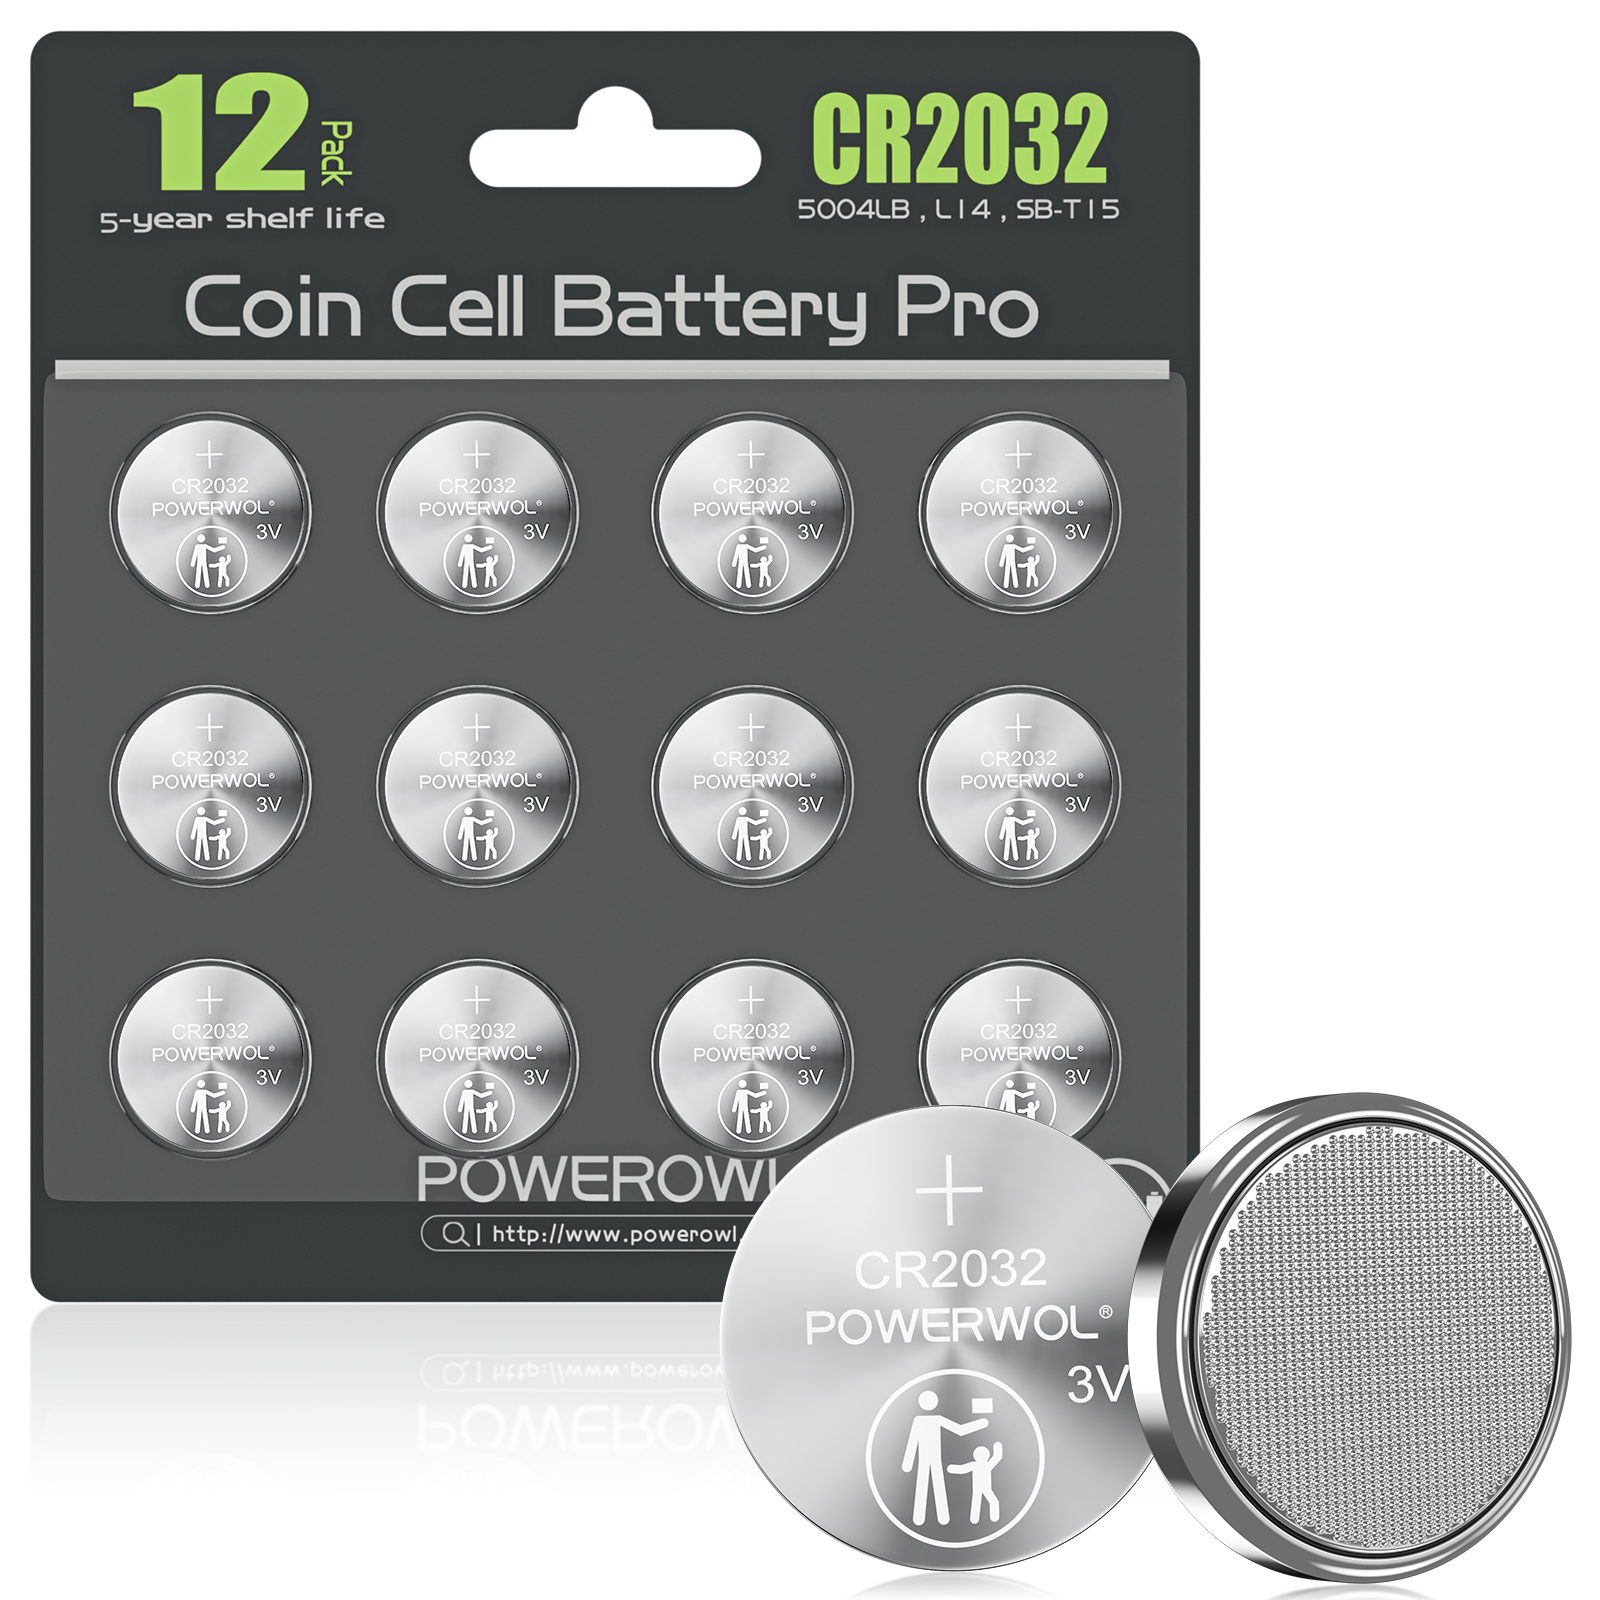 POWEROWL High Capacity CR2032 Battery 12 Pack - CR2032 Lithium 3V Coin Battery Replacement for Apple Airtag Key Fob Remote Controller LED Candles Glucometer